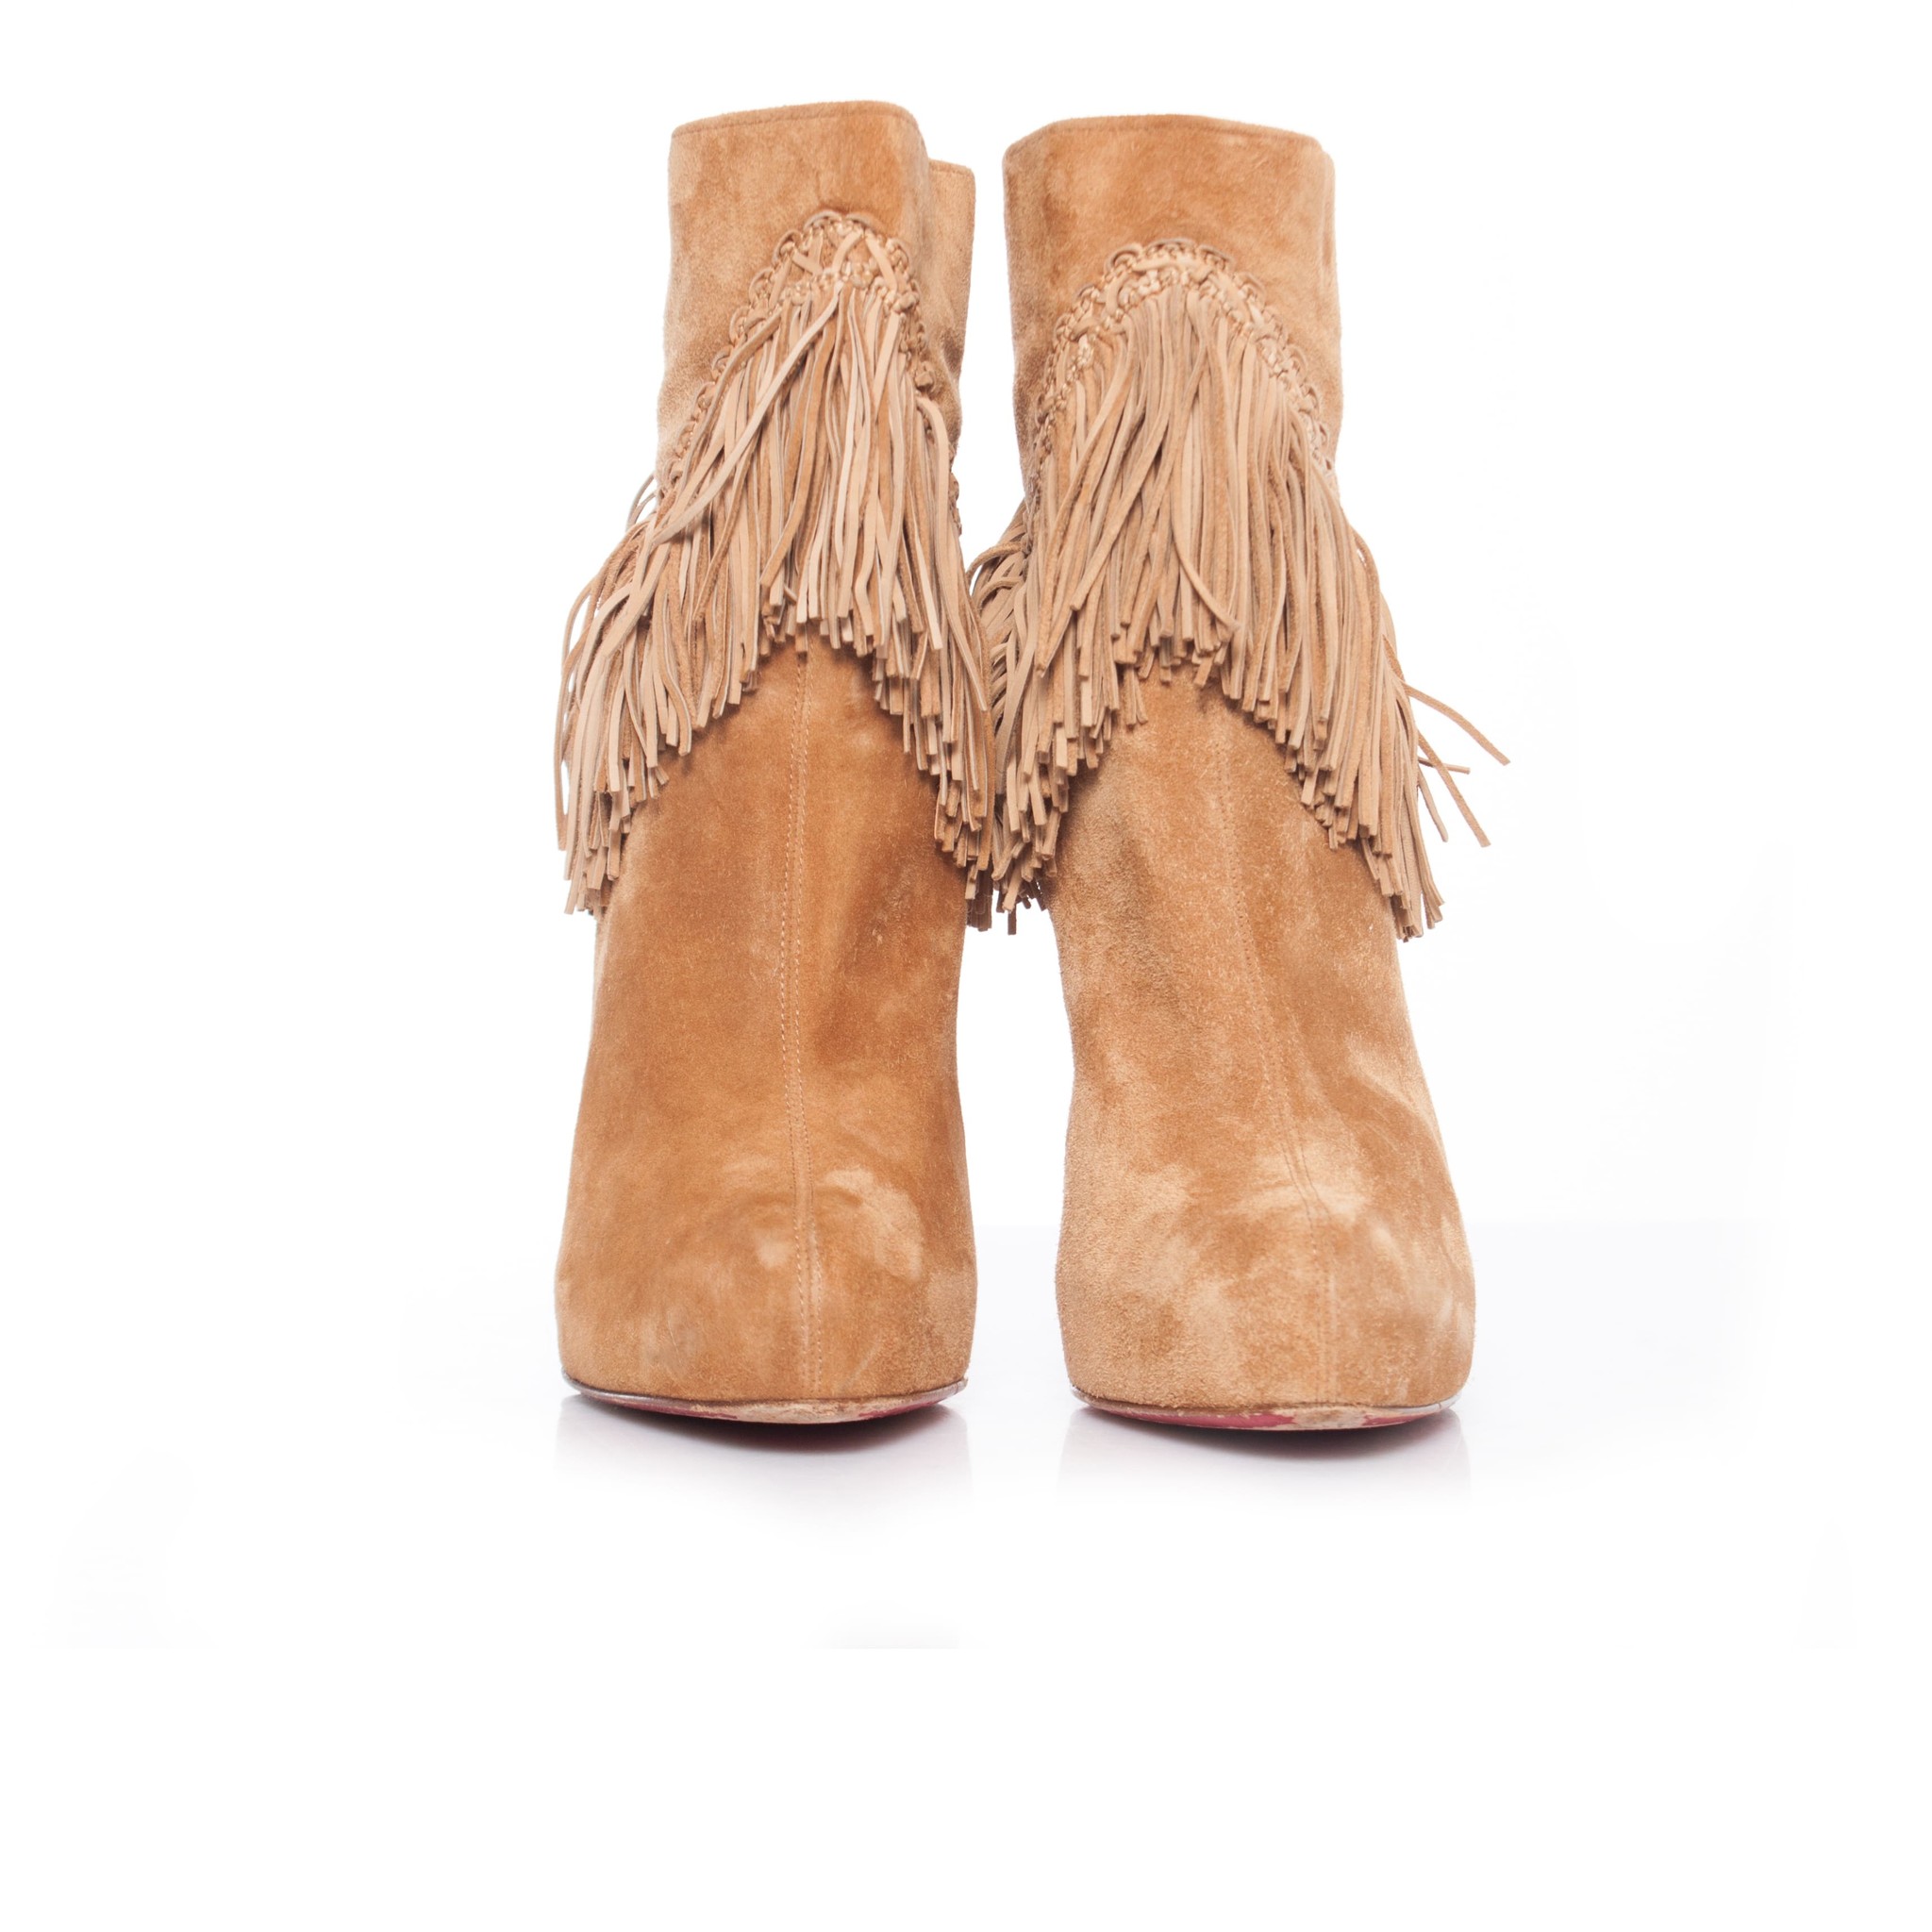 Western boots Christian Louboutin Camel size 39.5 EU in Suede - 32489118